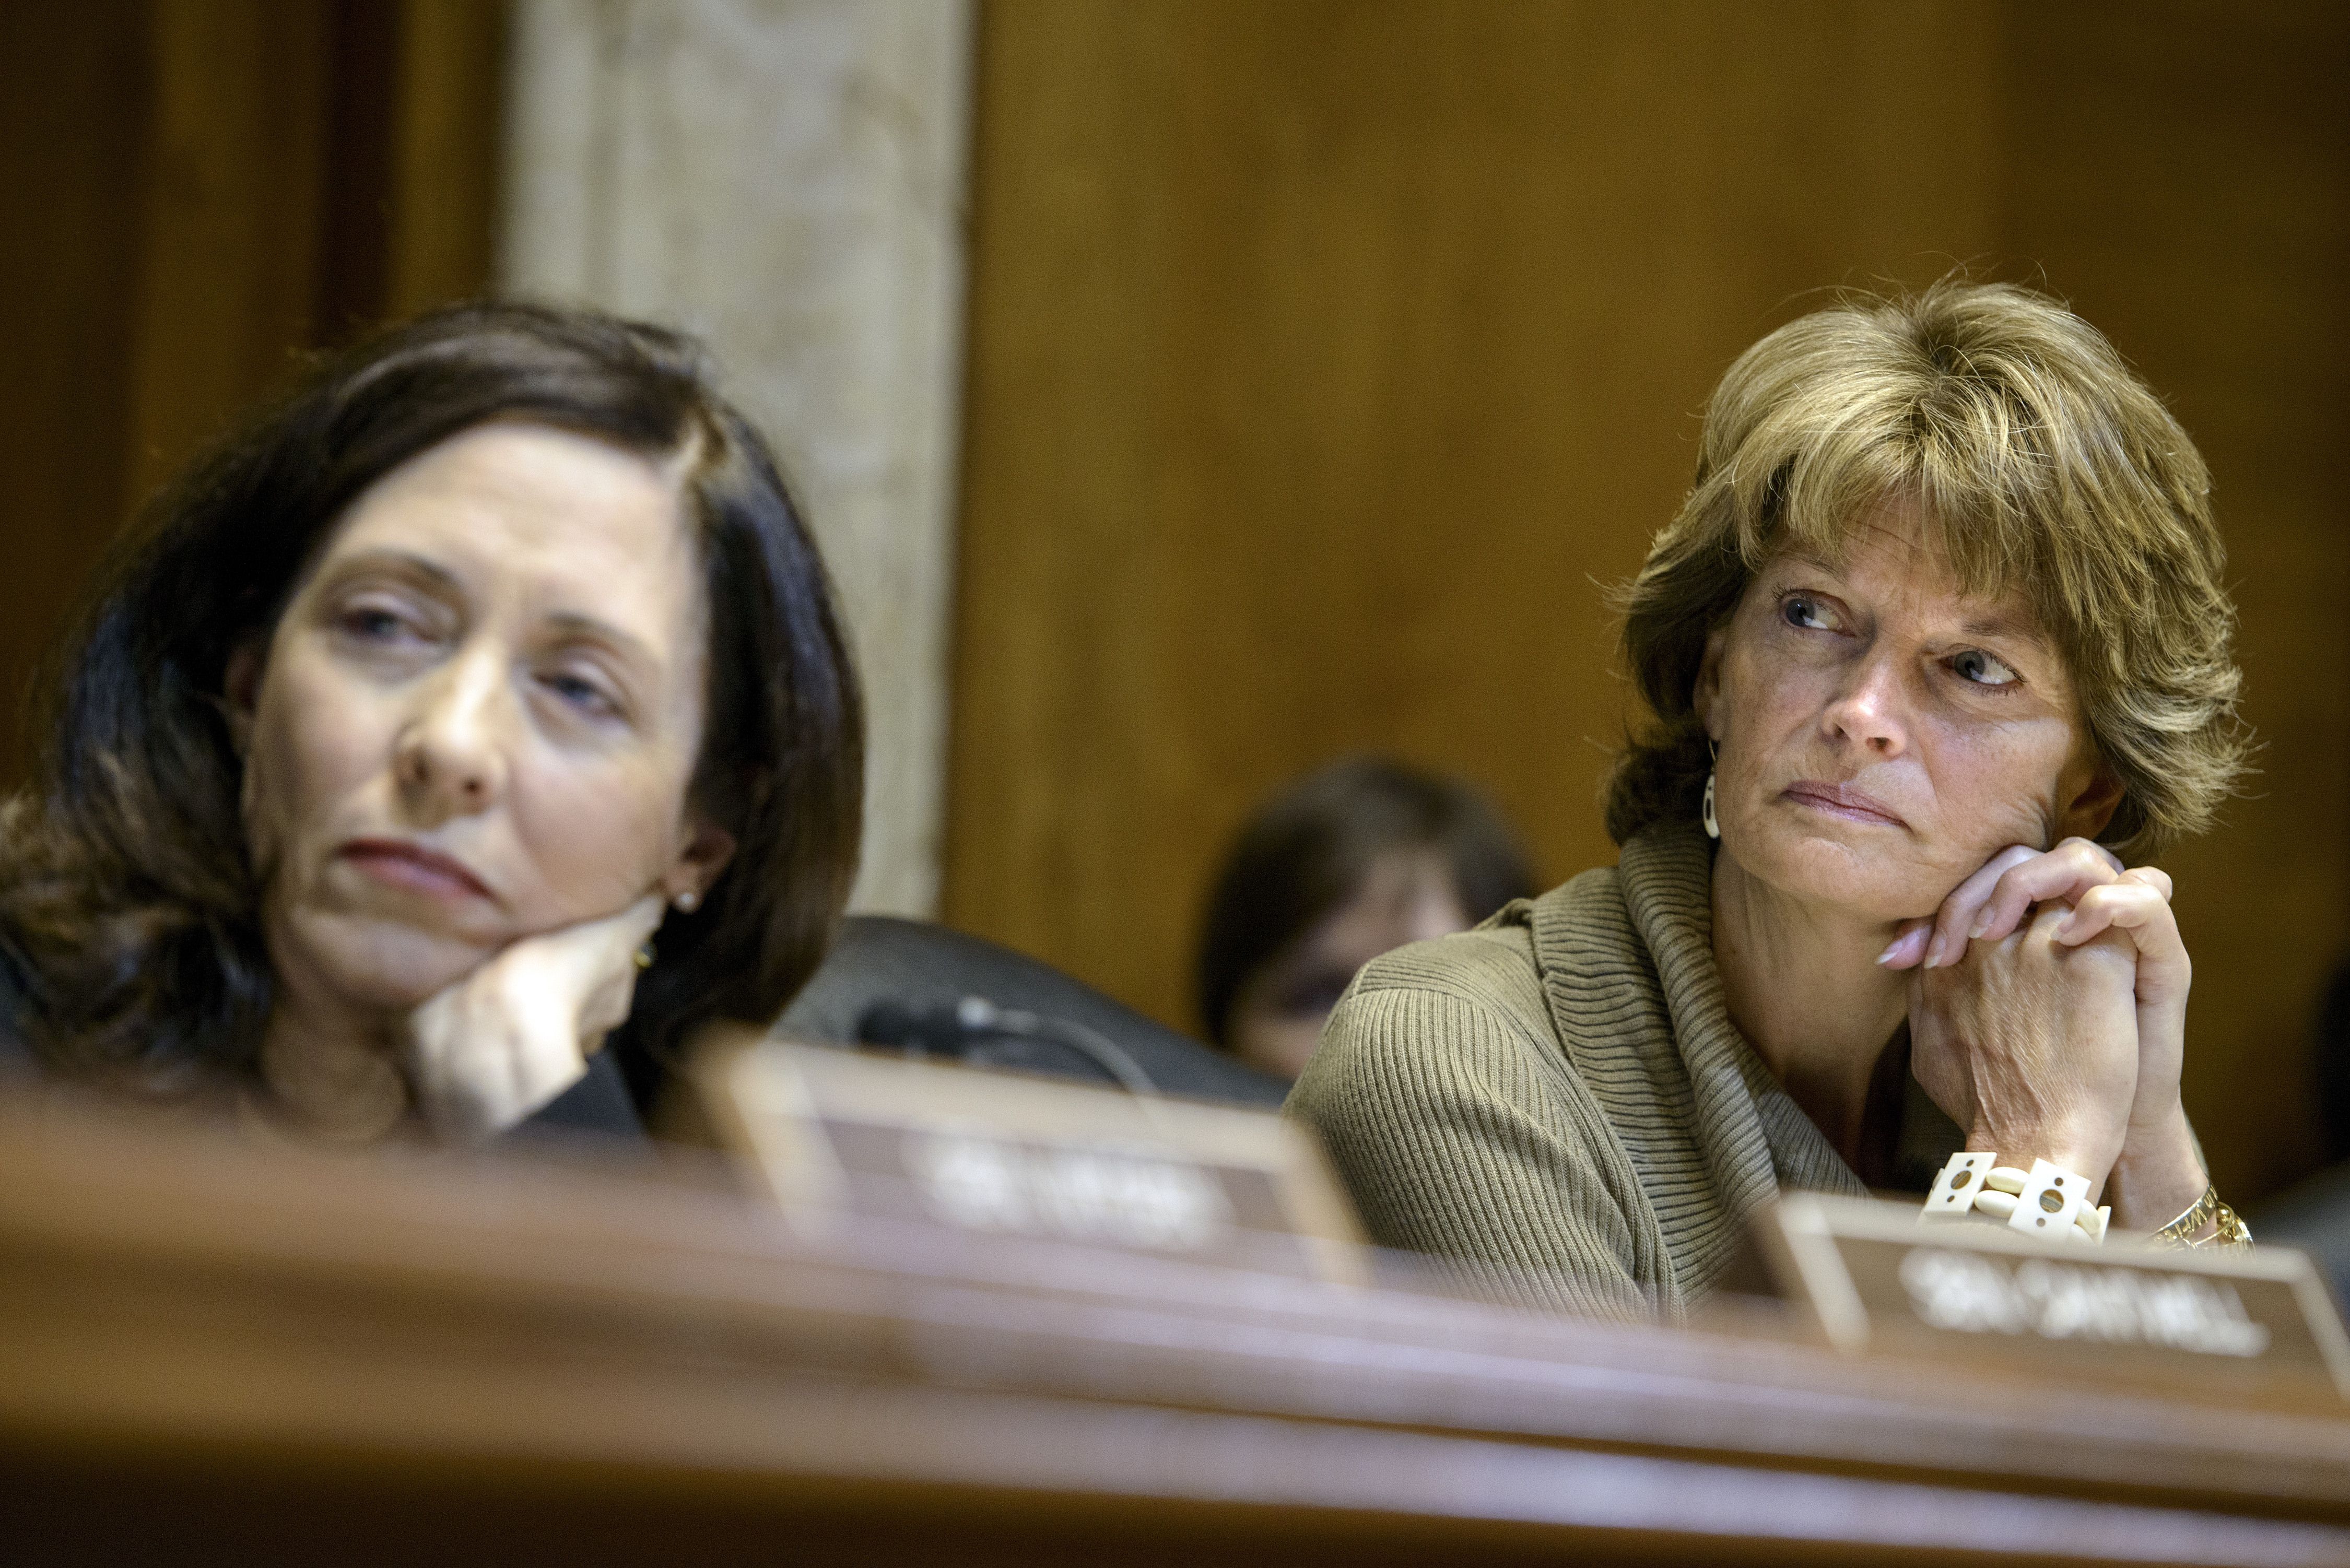 From left to right: Committee ranking member Senator Maria Cantwell (D-WA) and committee chairman Senator Lisa Murkowski (R-AK) listen during a session of the Senate Energy and Natural Resources Committee on Capitol Hill January 8, 2015 in Washington, DC. (Brendan Smialowski/AFP/Getty Images)